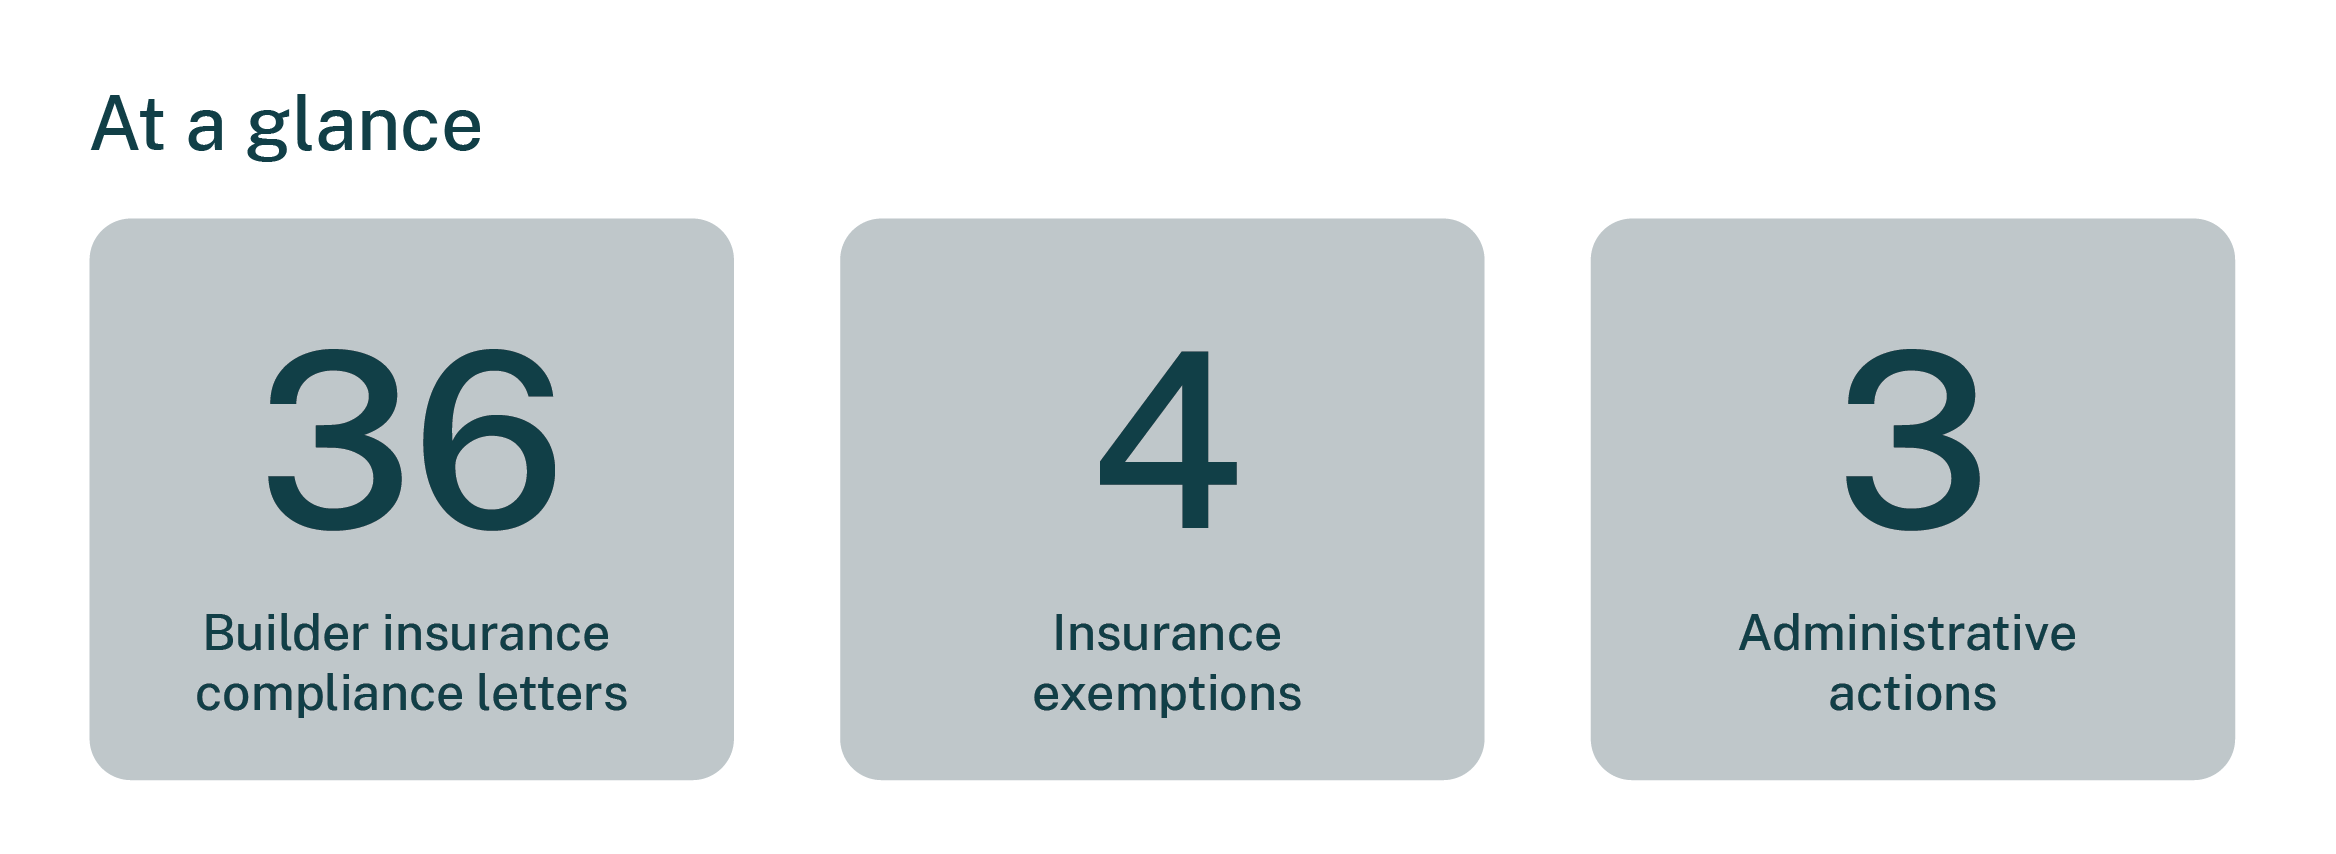 At a glance, SIRA issued 36 builder insurance compliance letters, 4 insurance exemptions and 3 administrative actions